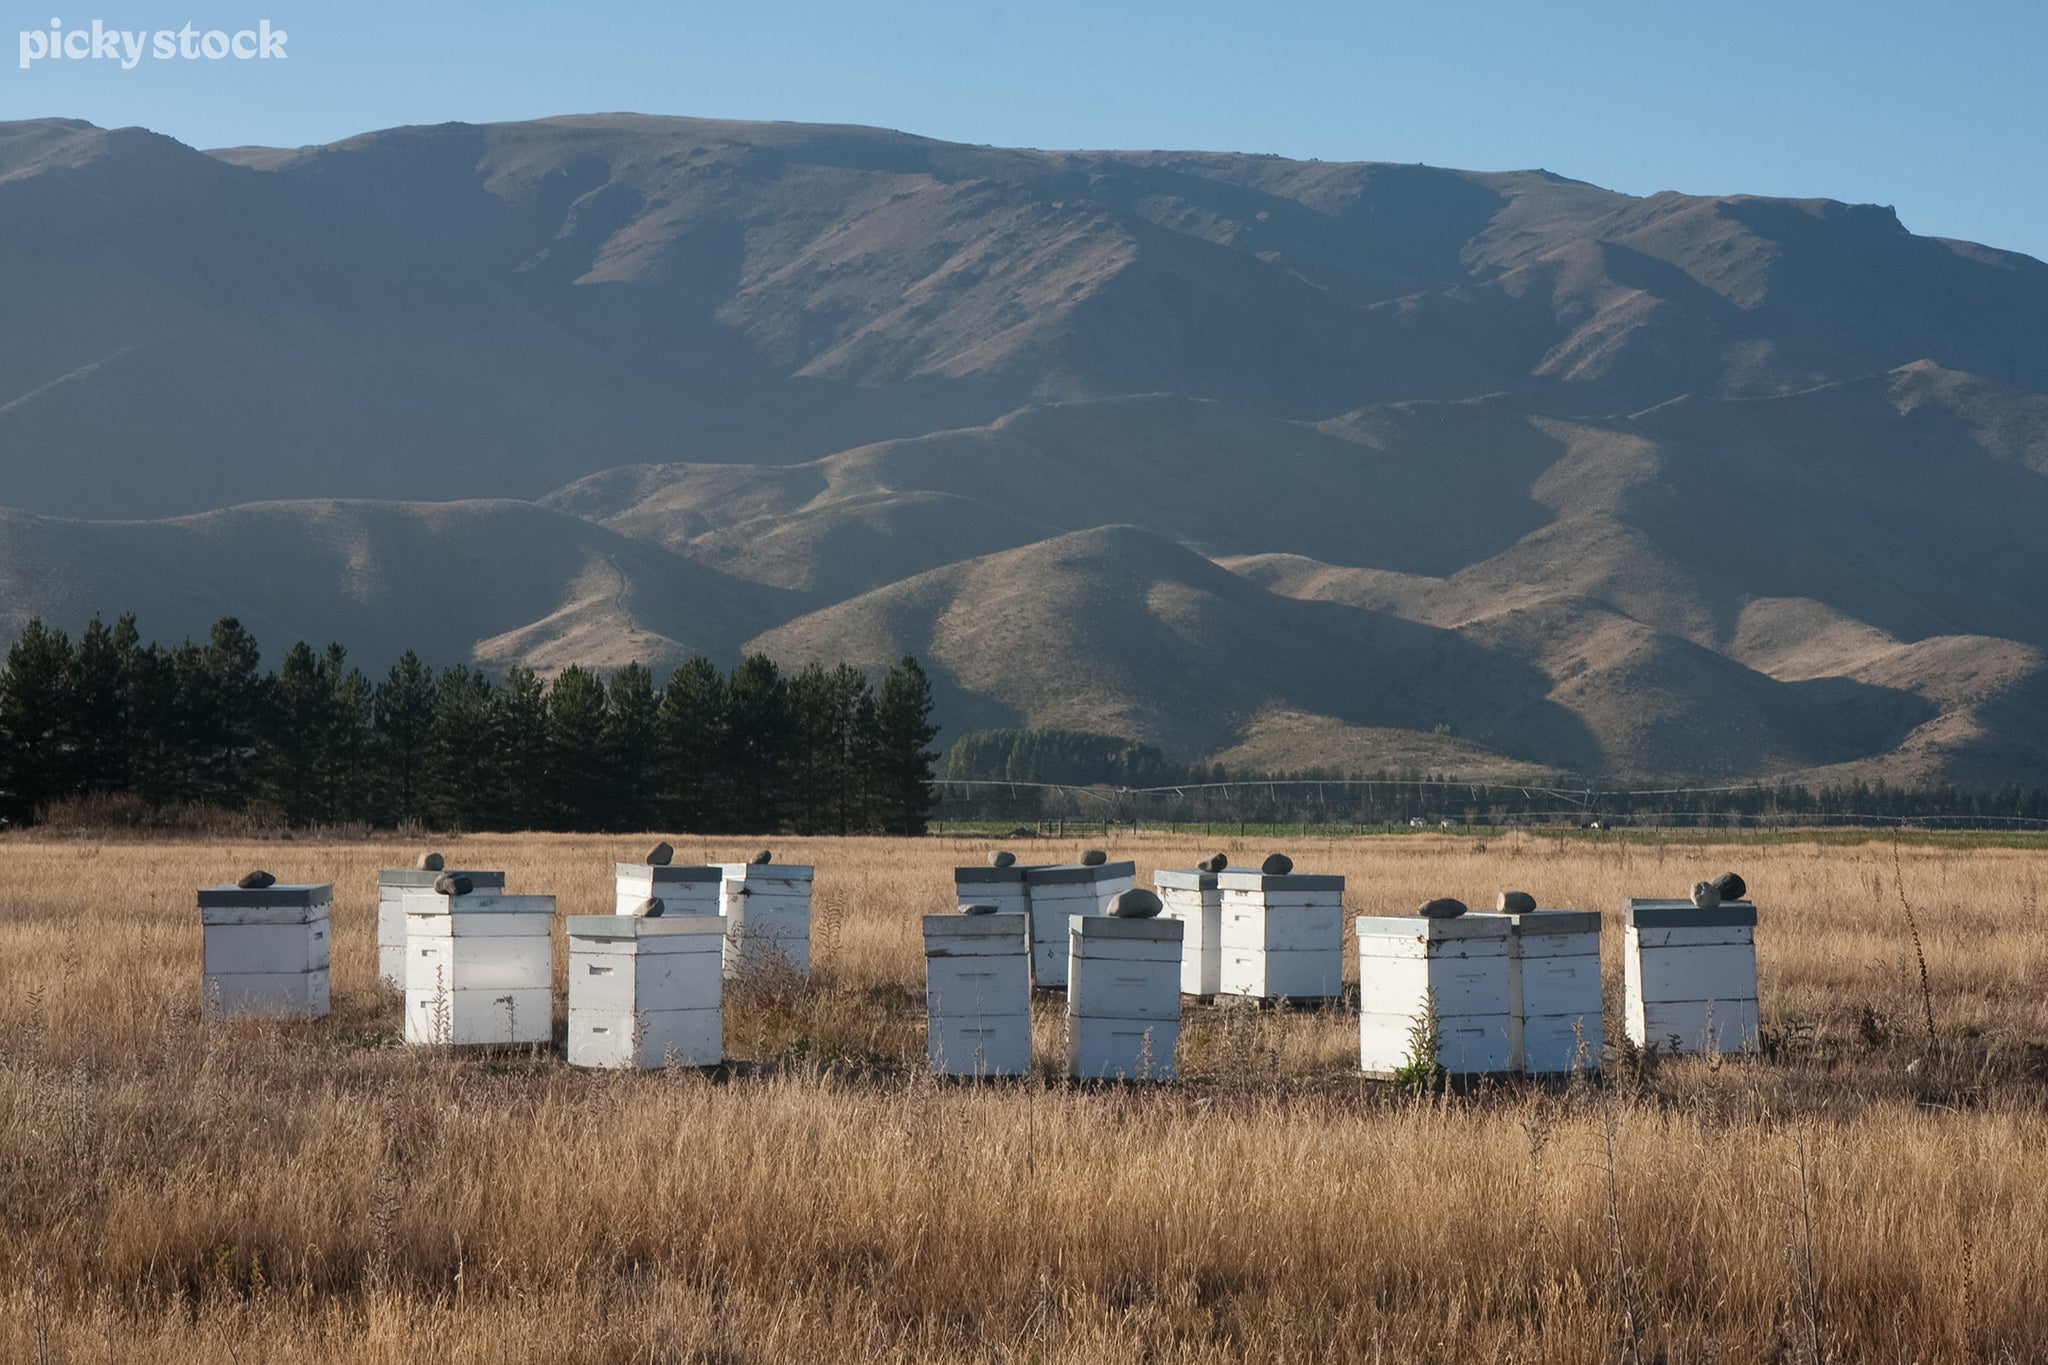 A landscape of apiaries used for bee farming, the white crates sit alone in a field of golden grass and large matte rocks weight the harvesting boxes closed. Green pines and looming hills cat shadows over the farmland below.